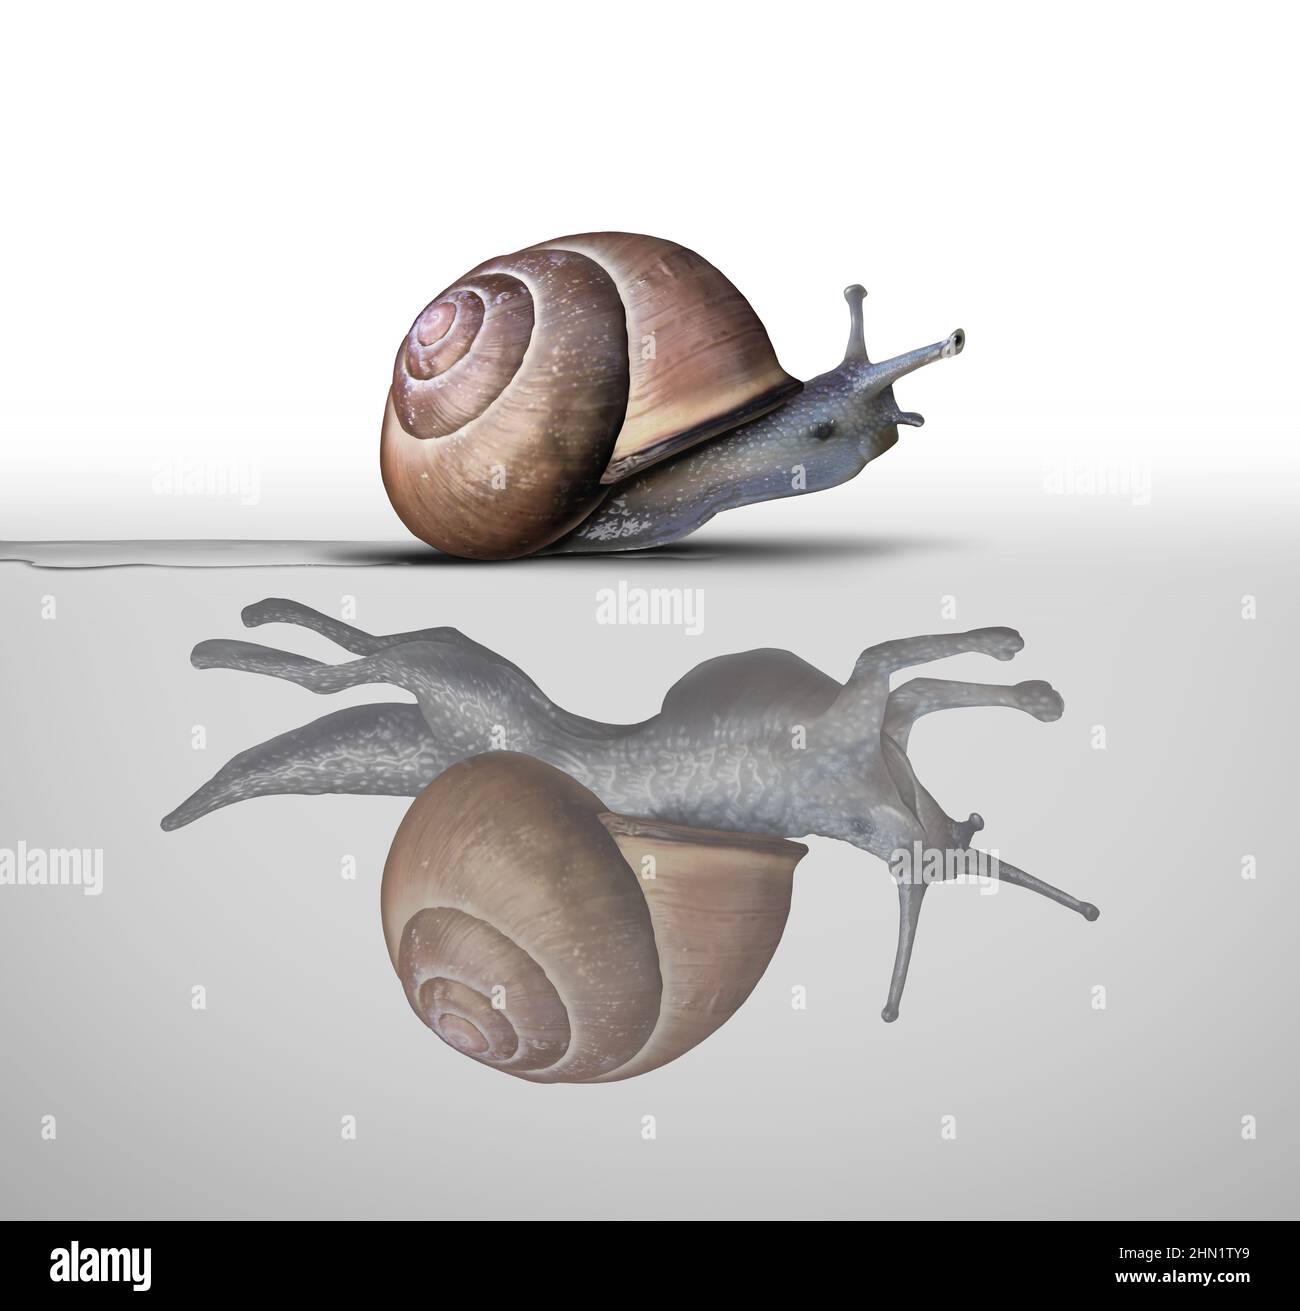 Potential metaphor and inner power concept as a symbol for motivational feeling and the power within as a slow snail with a reflection. Stock Photo